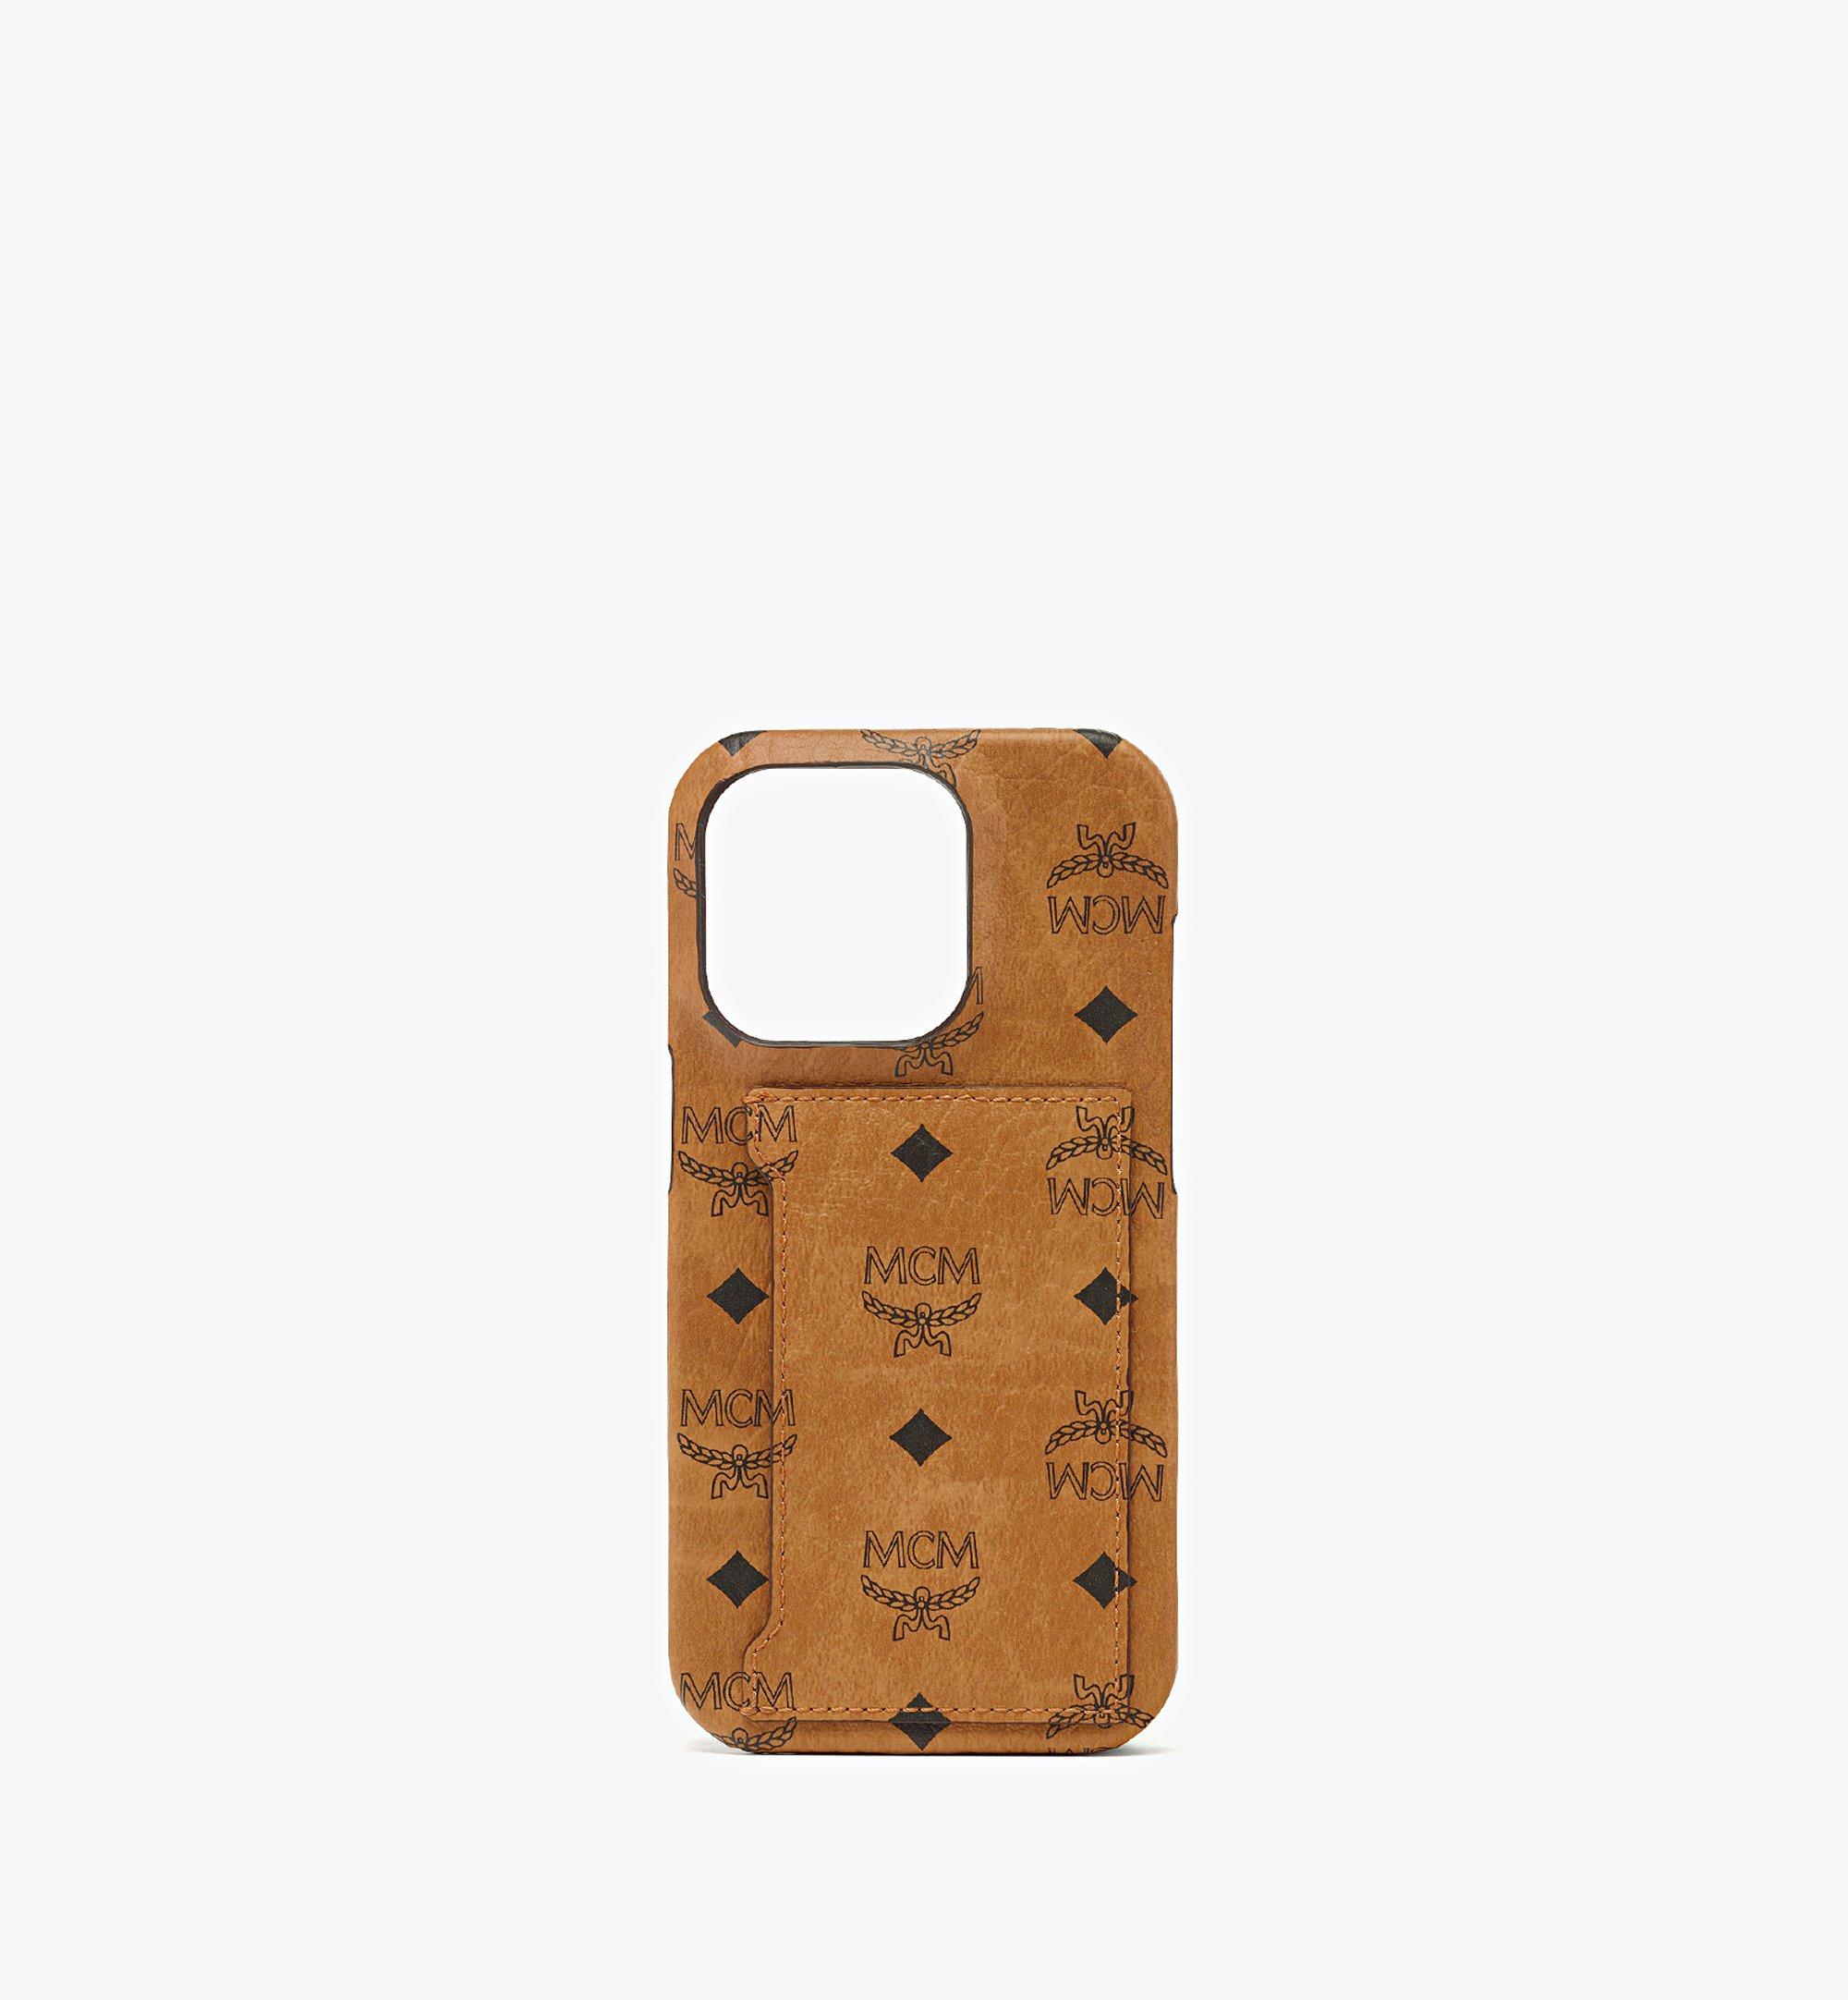 The Phone Co on Instagram: Louis Vuitton Hard case With brand box Model  list iPhone X iPhone 11 iPhone 11 pro iPhone 11 pro max iPhone 12 iPhone 12  Pro Max Top